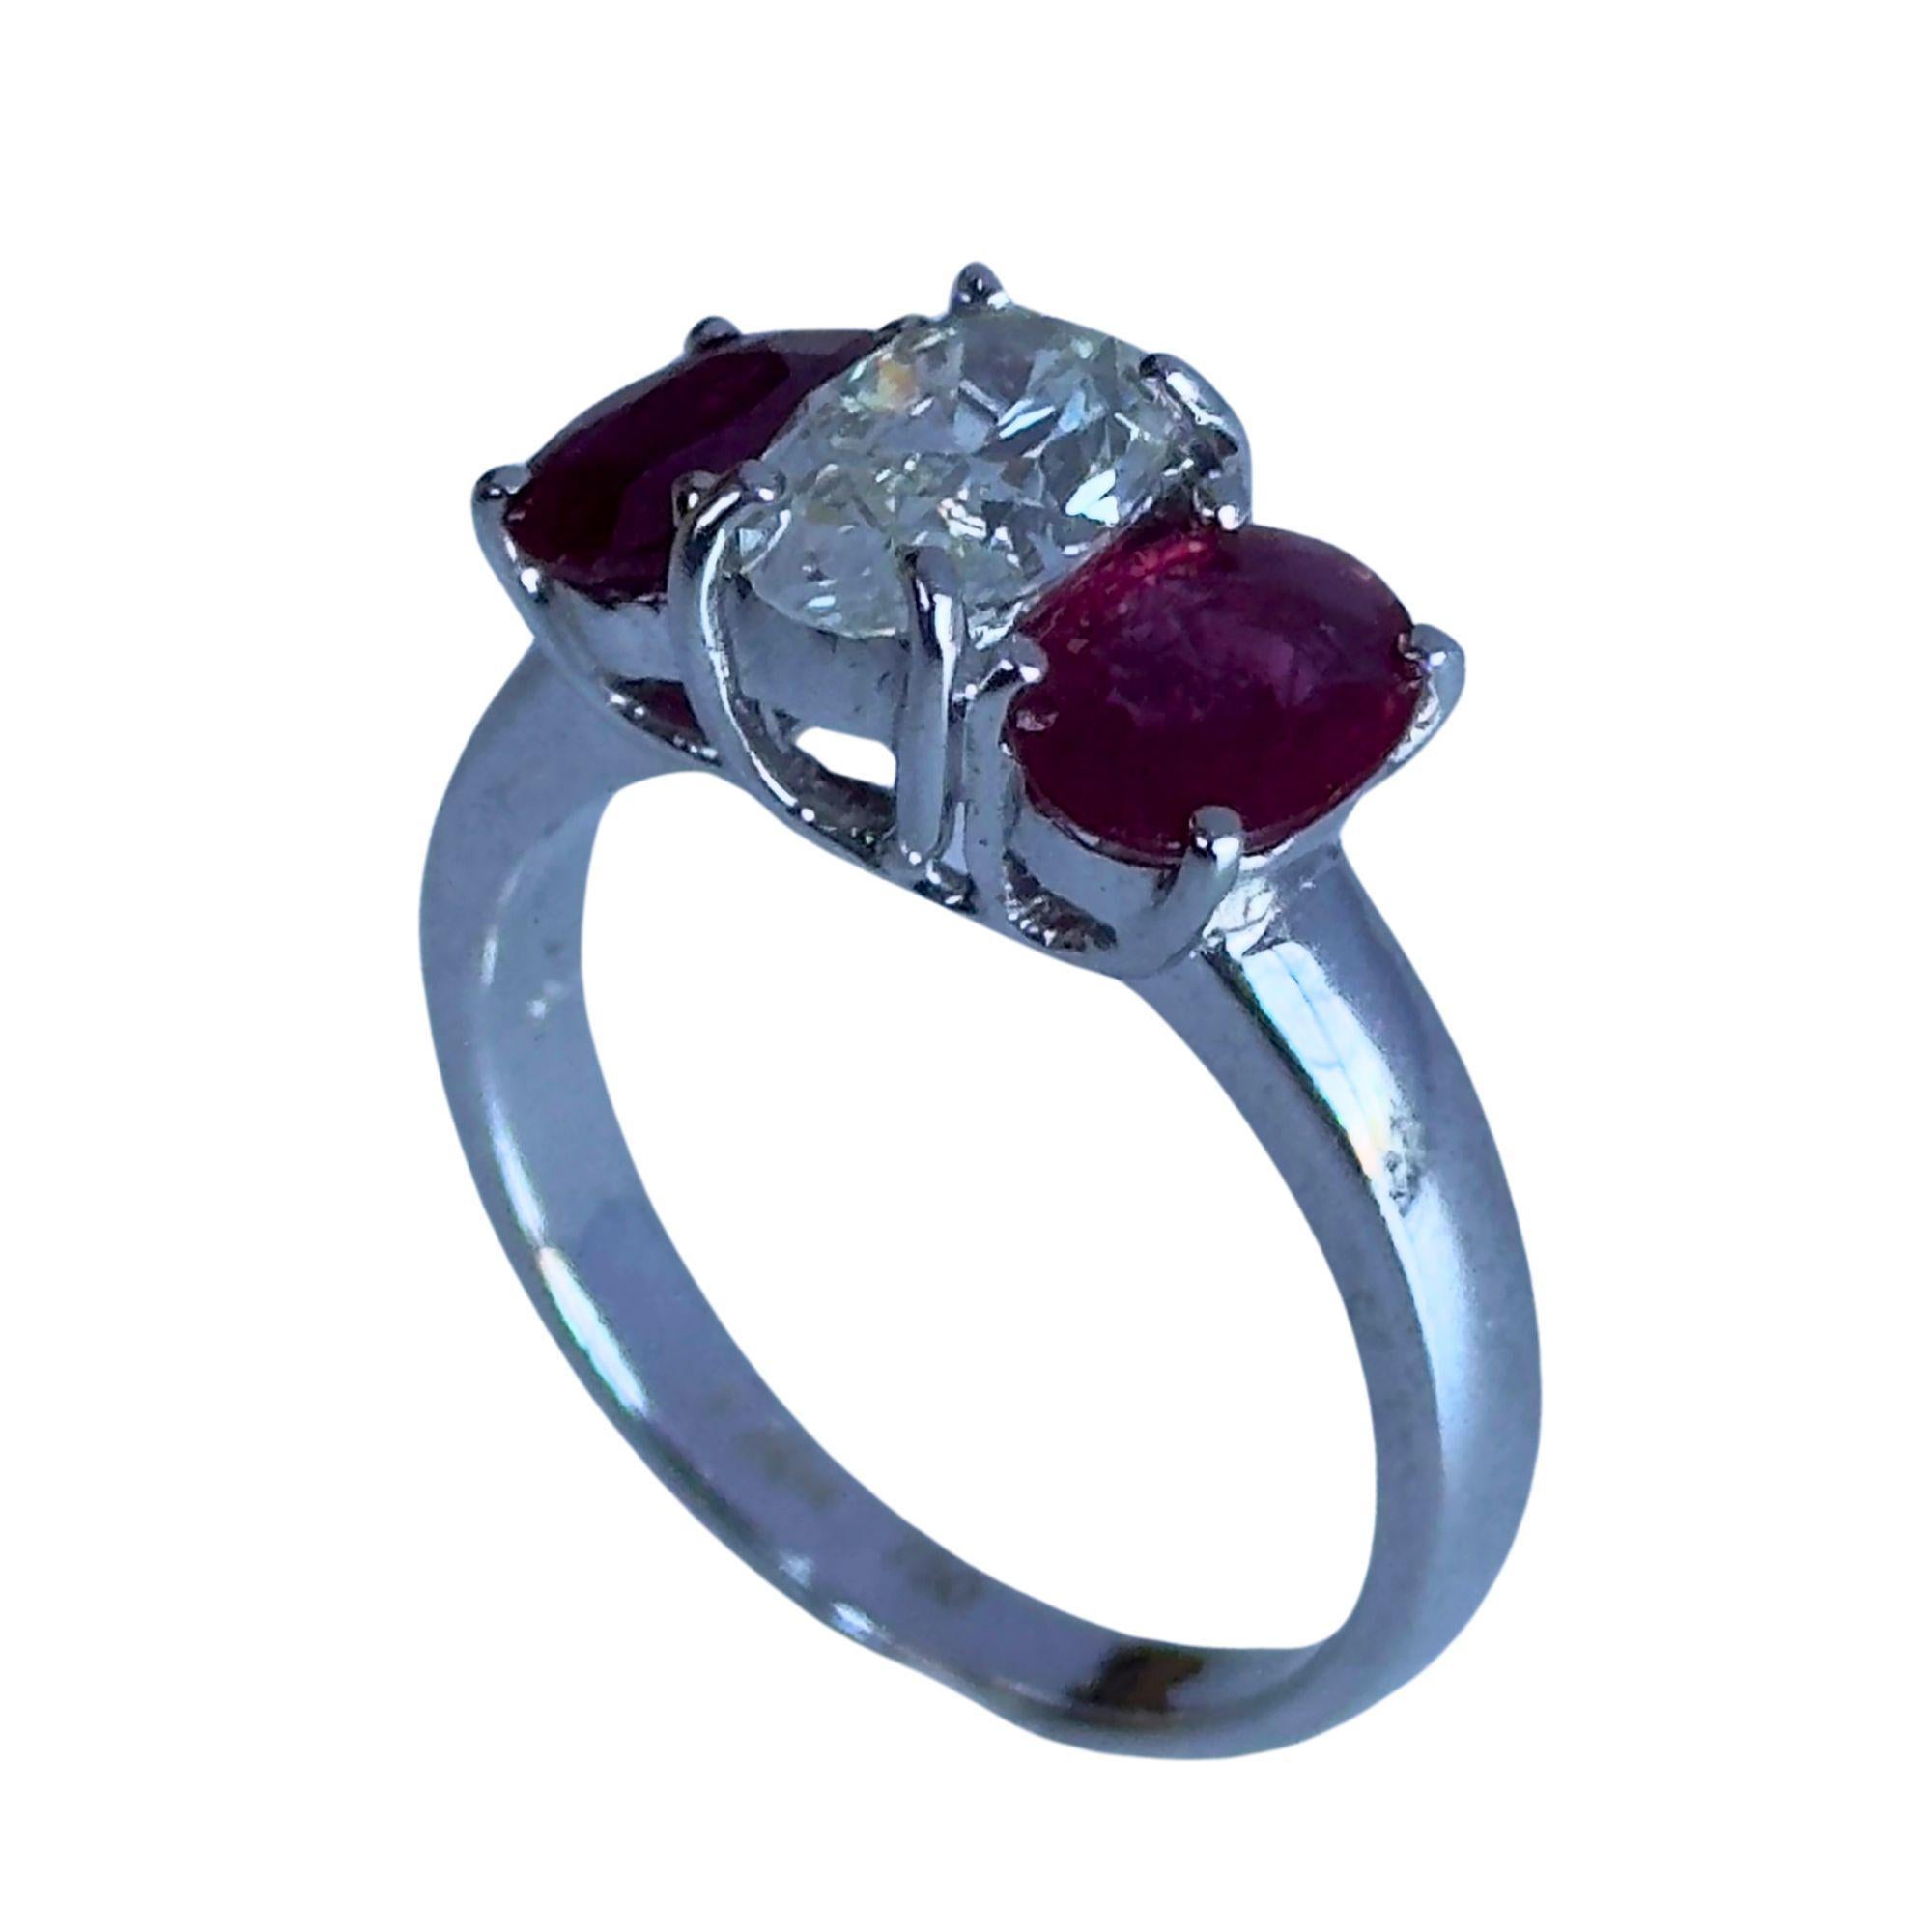 Add a pop of color to your jewelry collection with this 18k Diamond and Ruby Three Stone Ring. Crafted in 18k White Gold, this 5.7 gram ring features a diamond center weigh 1.02 carats with 2 rubies on each side weighing 1.58 carats all together.